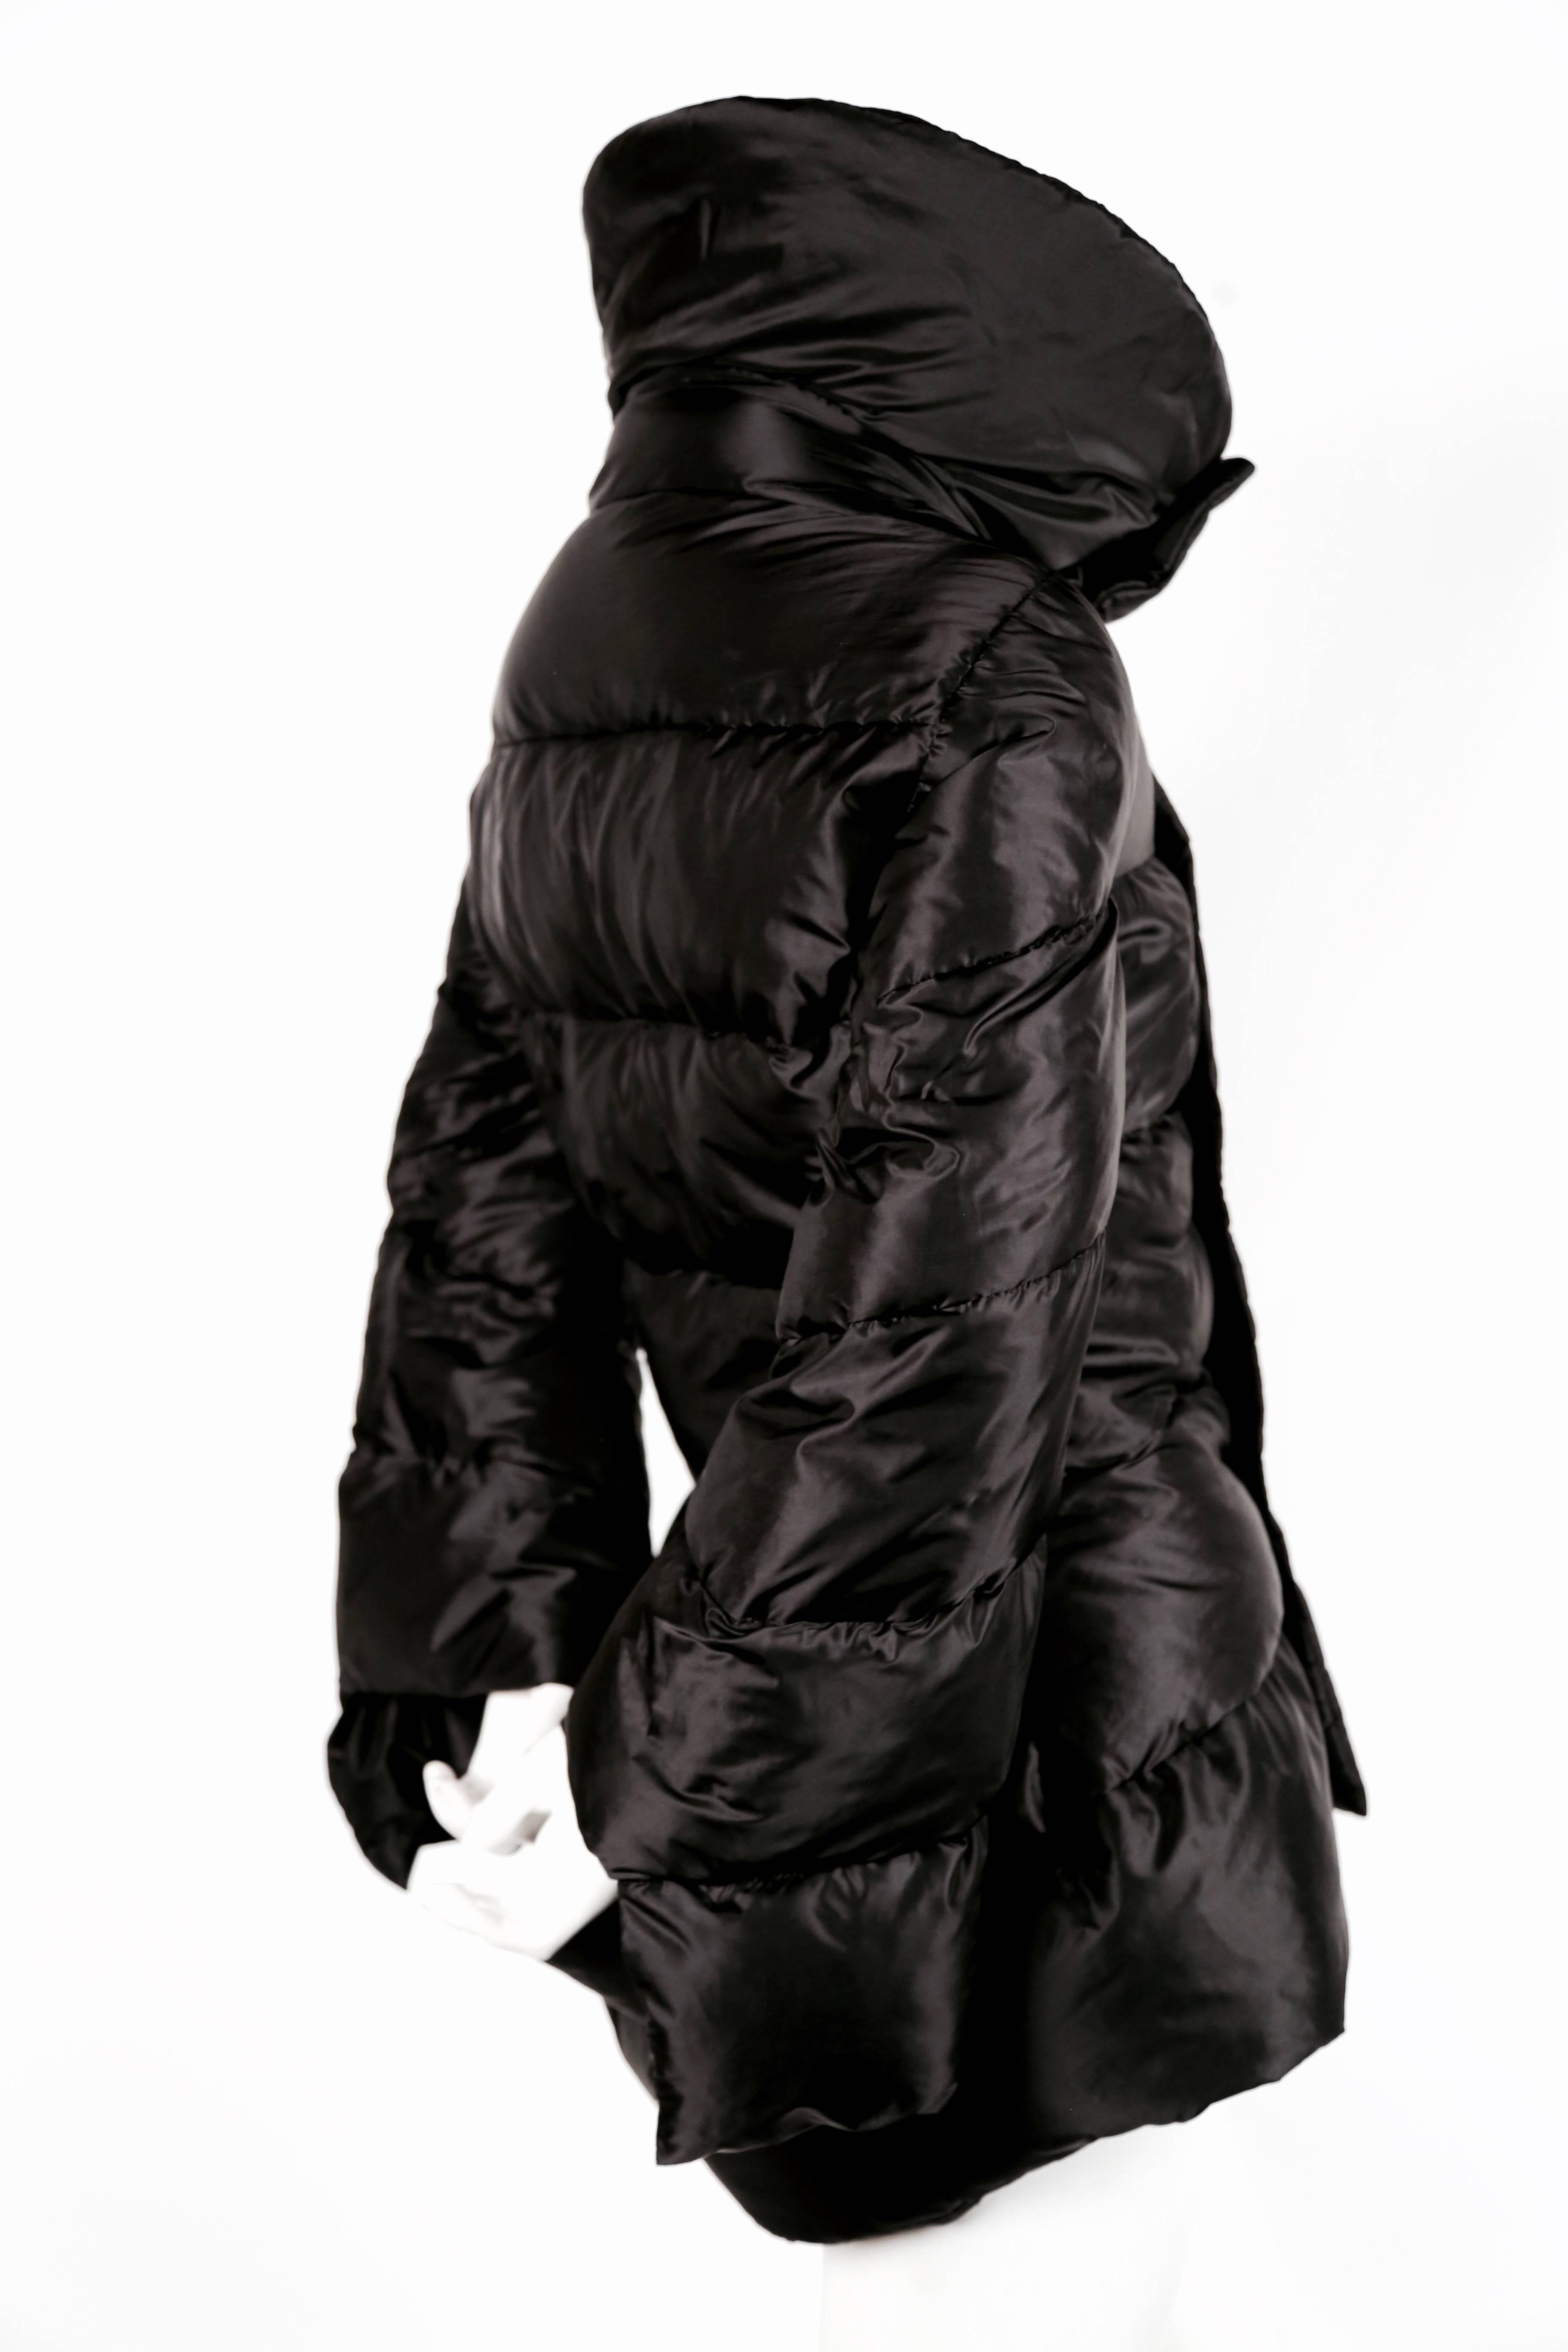 Women's or Men's Junya Watanabe for Comme des Garcons padded runway coat with bustle, 2009 